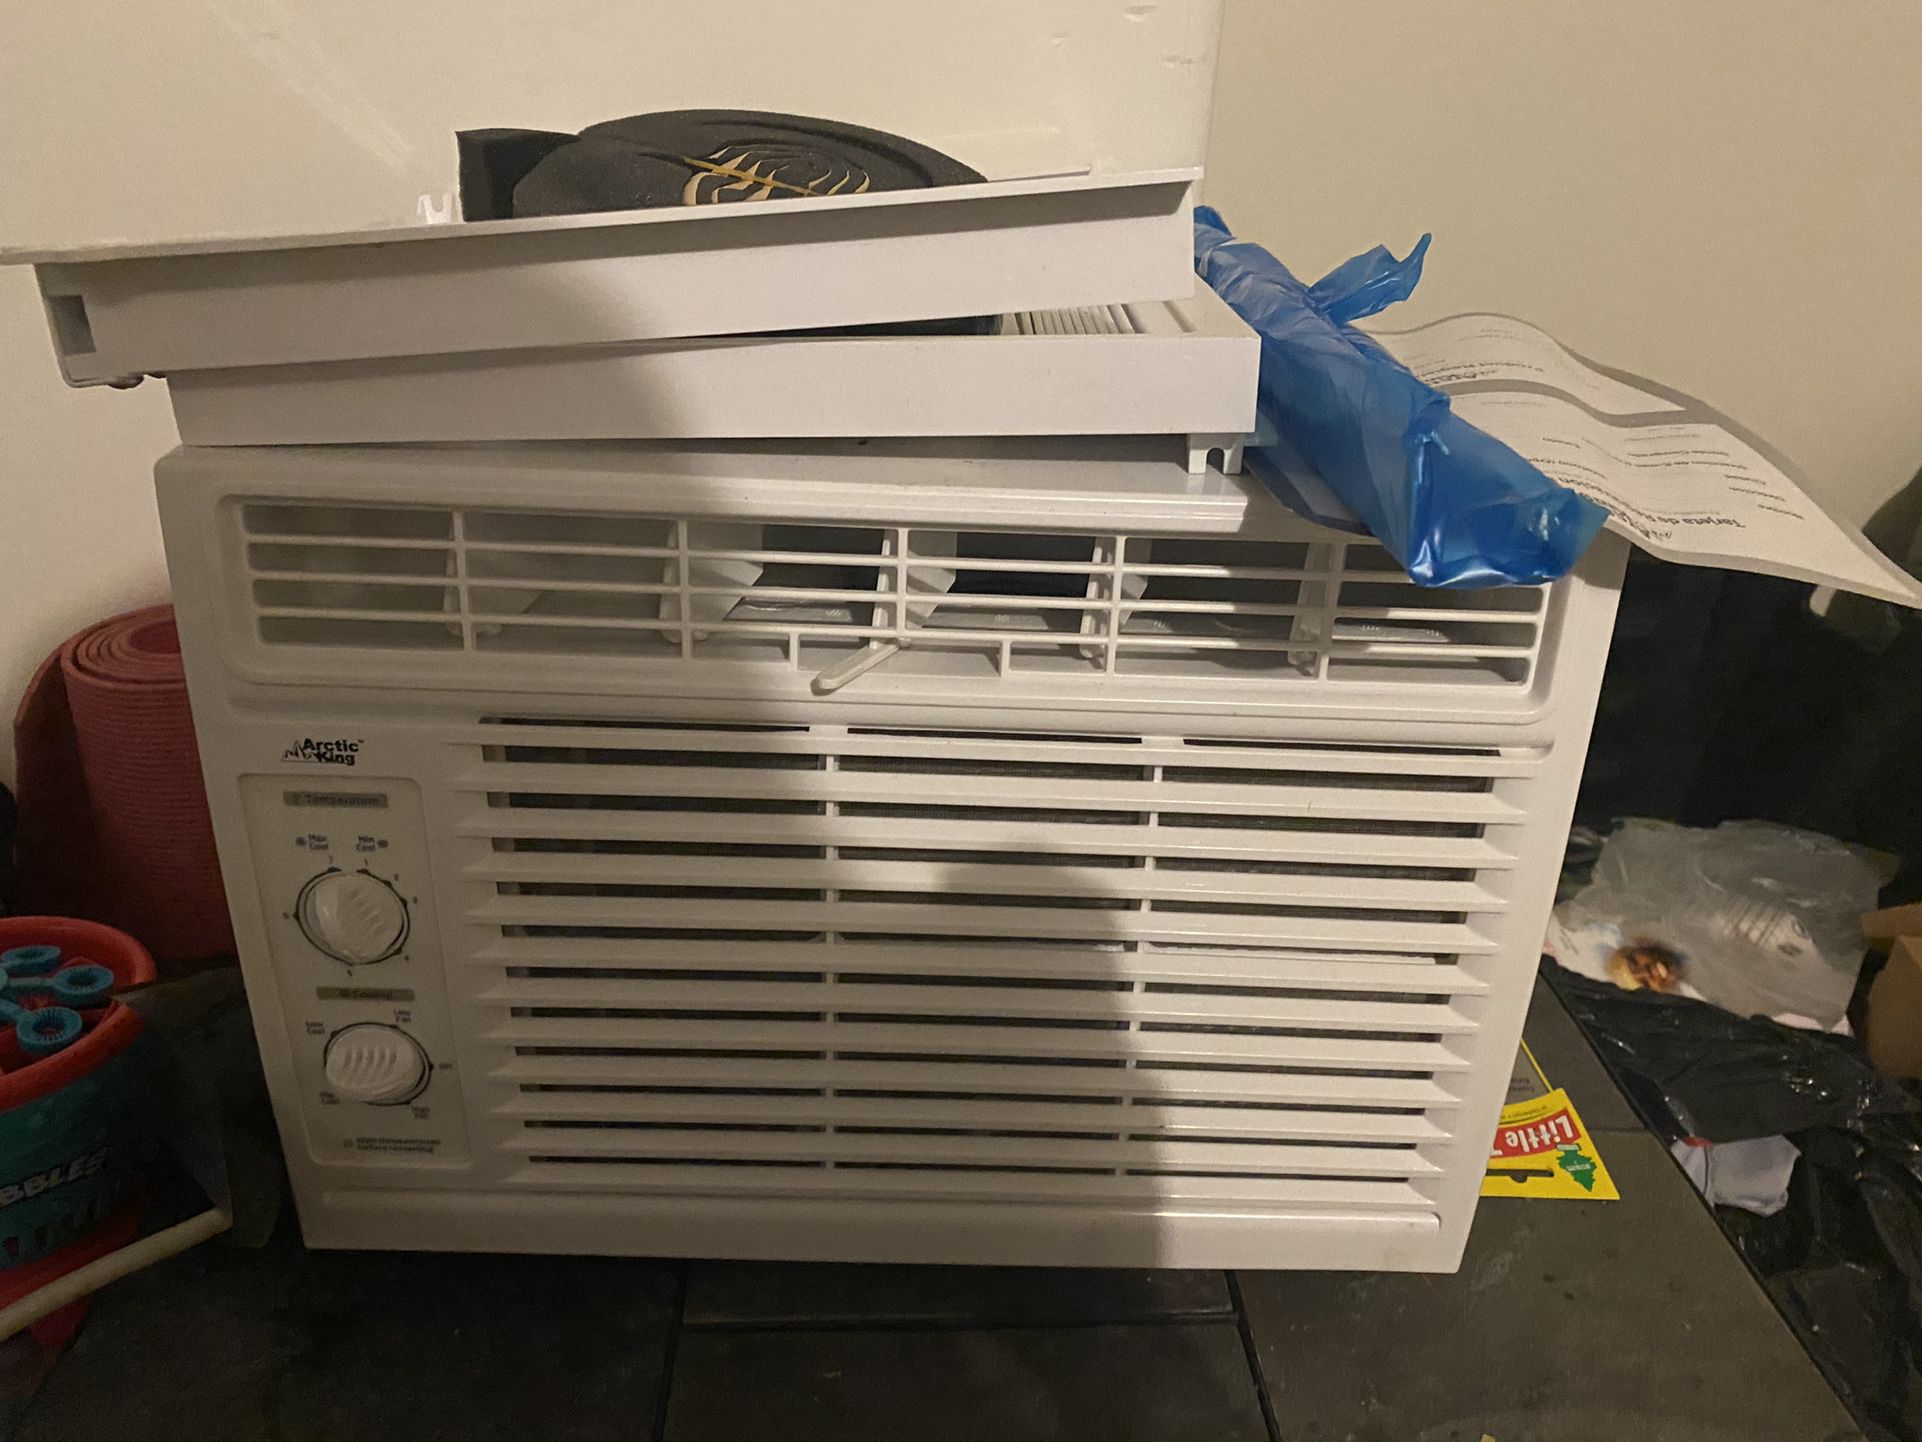 (Used Once )Attic king Window AC Unit (250sq ft) $75 FIRM